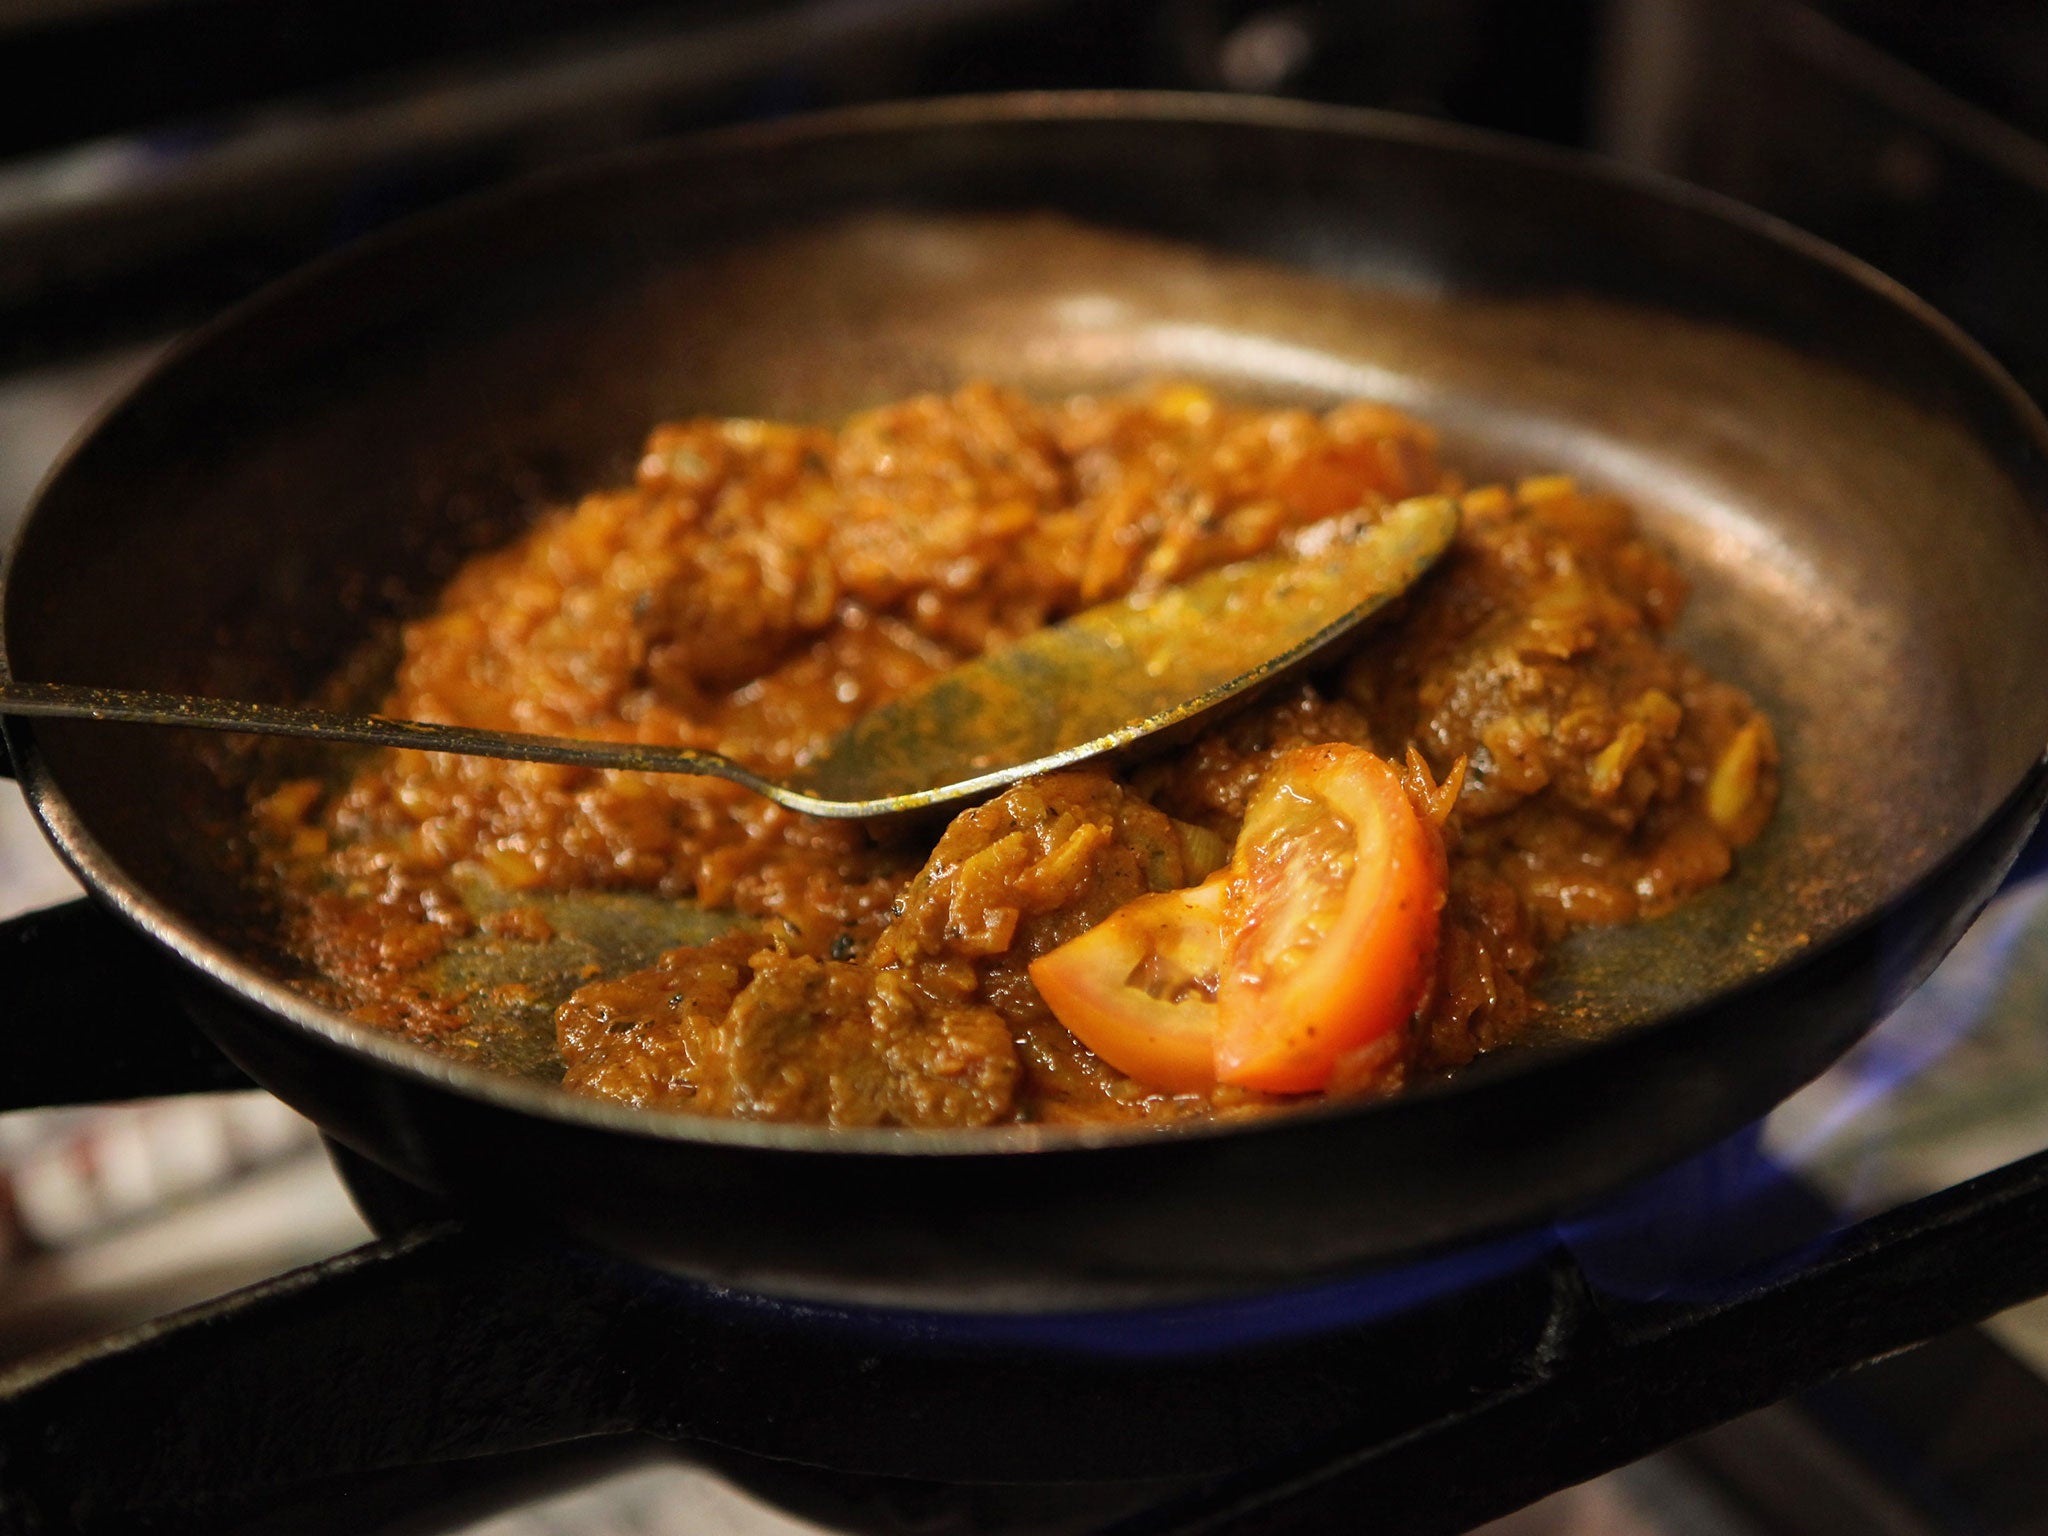 A spice commonly used in curries could help the brain heal itself, new research has suggested